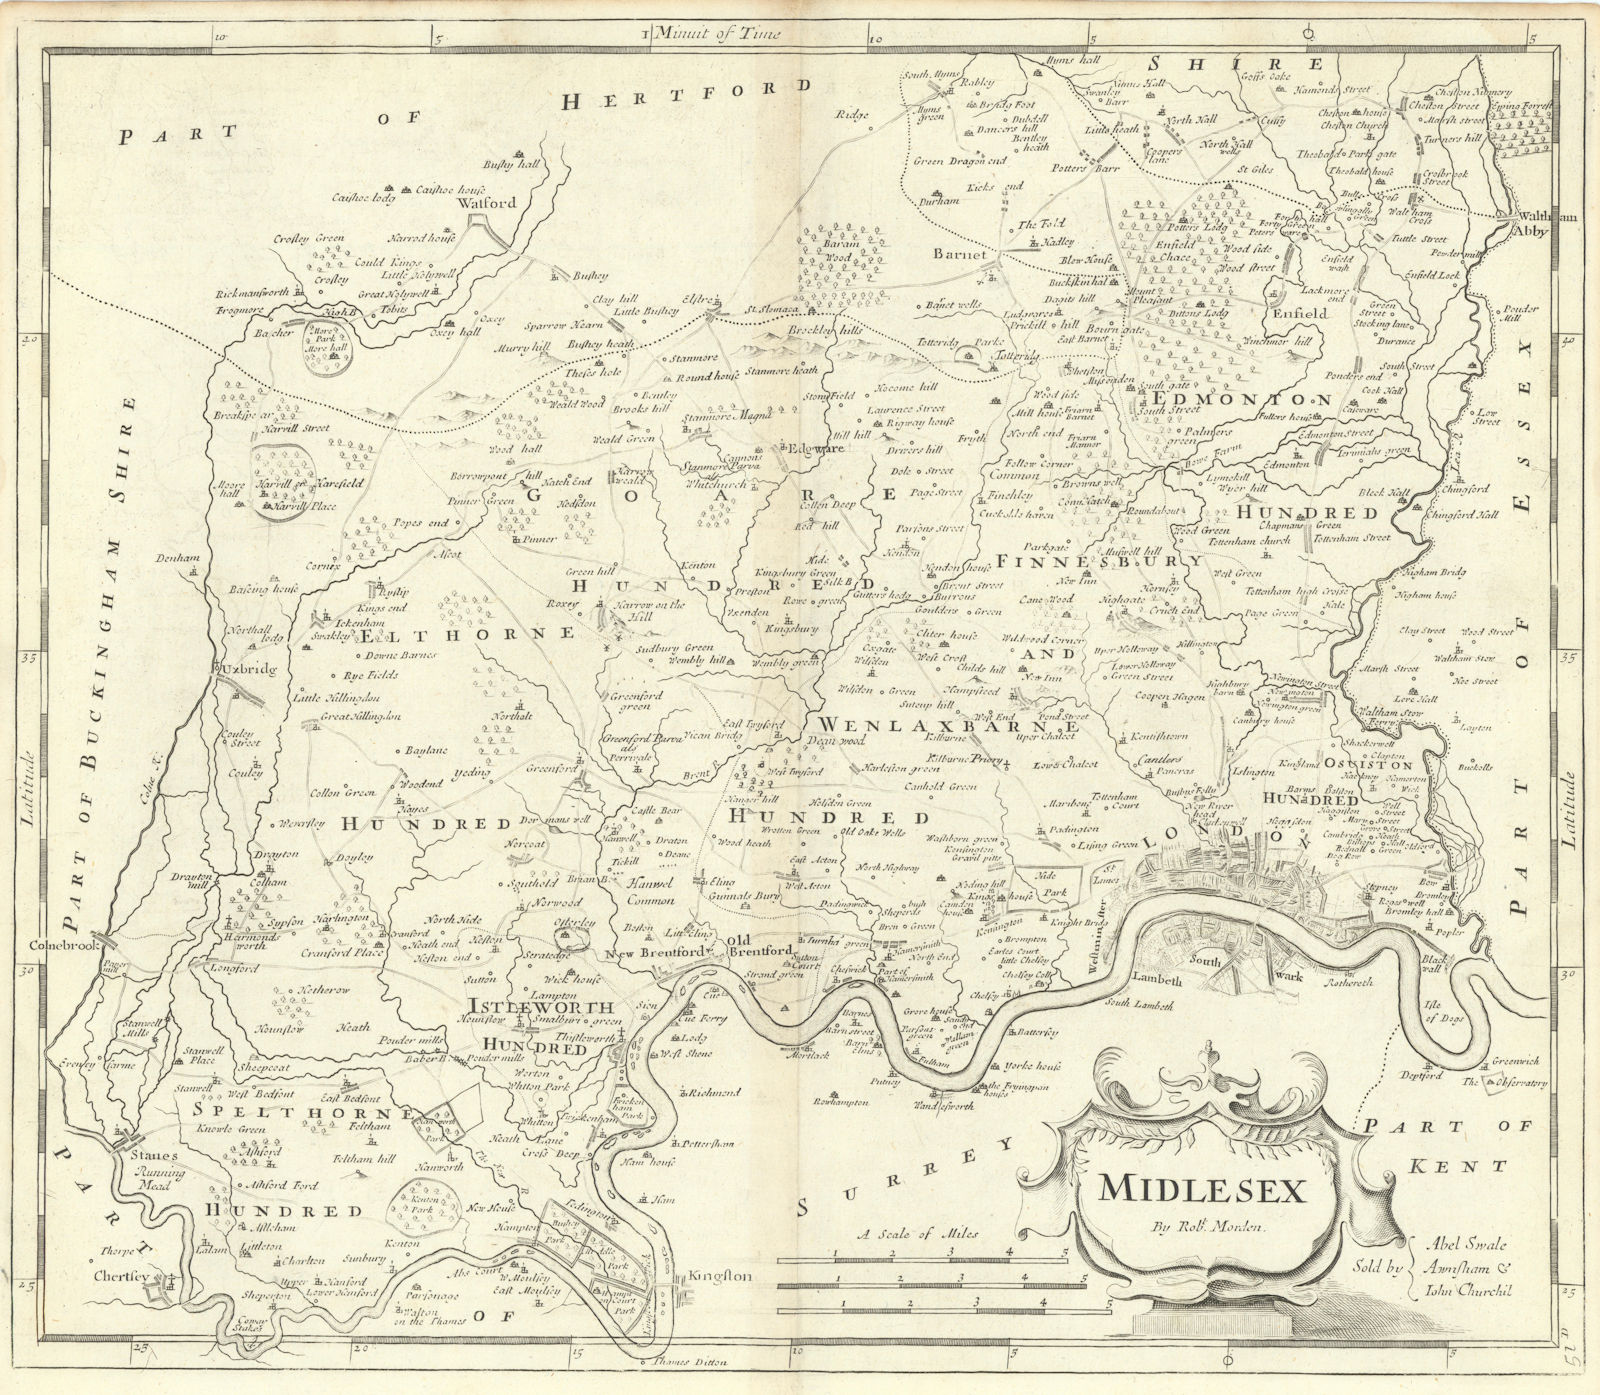 Middlesex. 'MIDLESEX' by ROBERT MORDEN.Present-day North & West London 1722 map